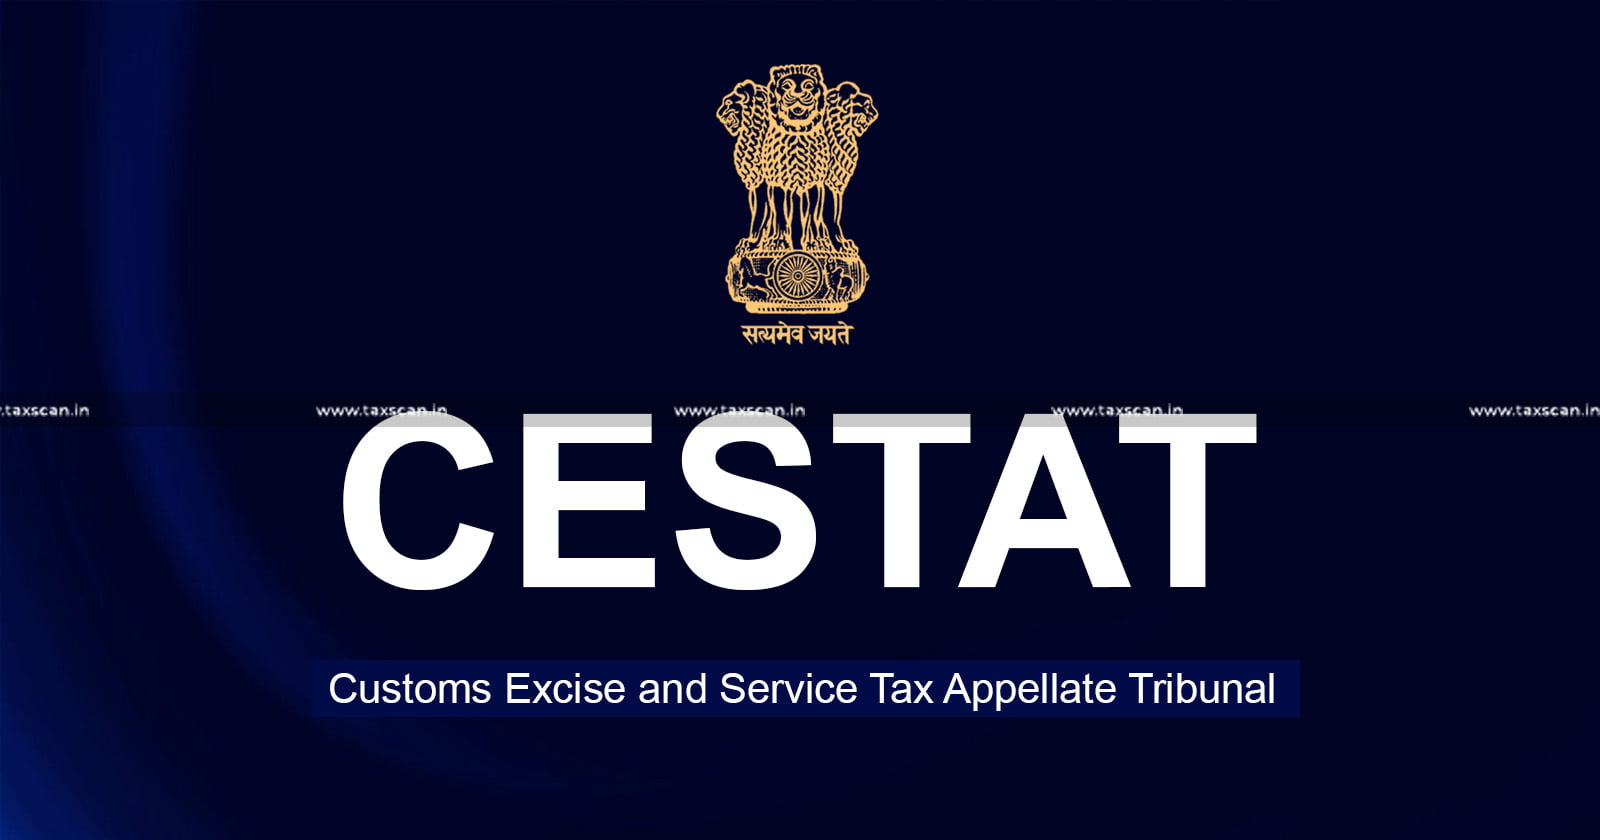 Exempted and Cleared for home consumption - home consumption without Excise duty payment - Excisable goods - CESTAT - taxscan